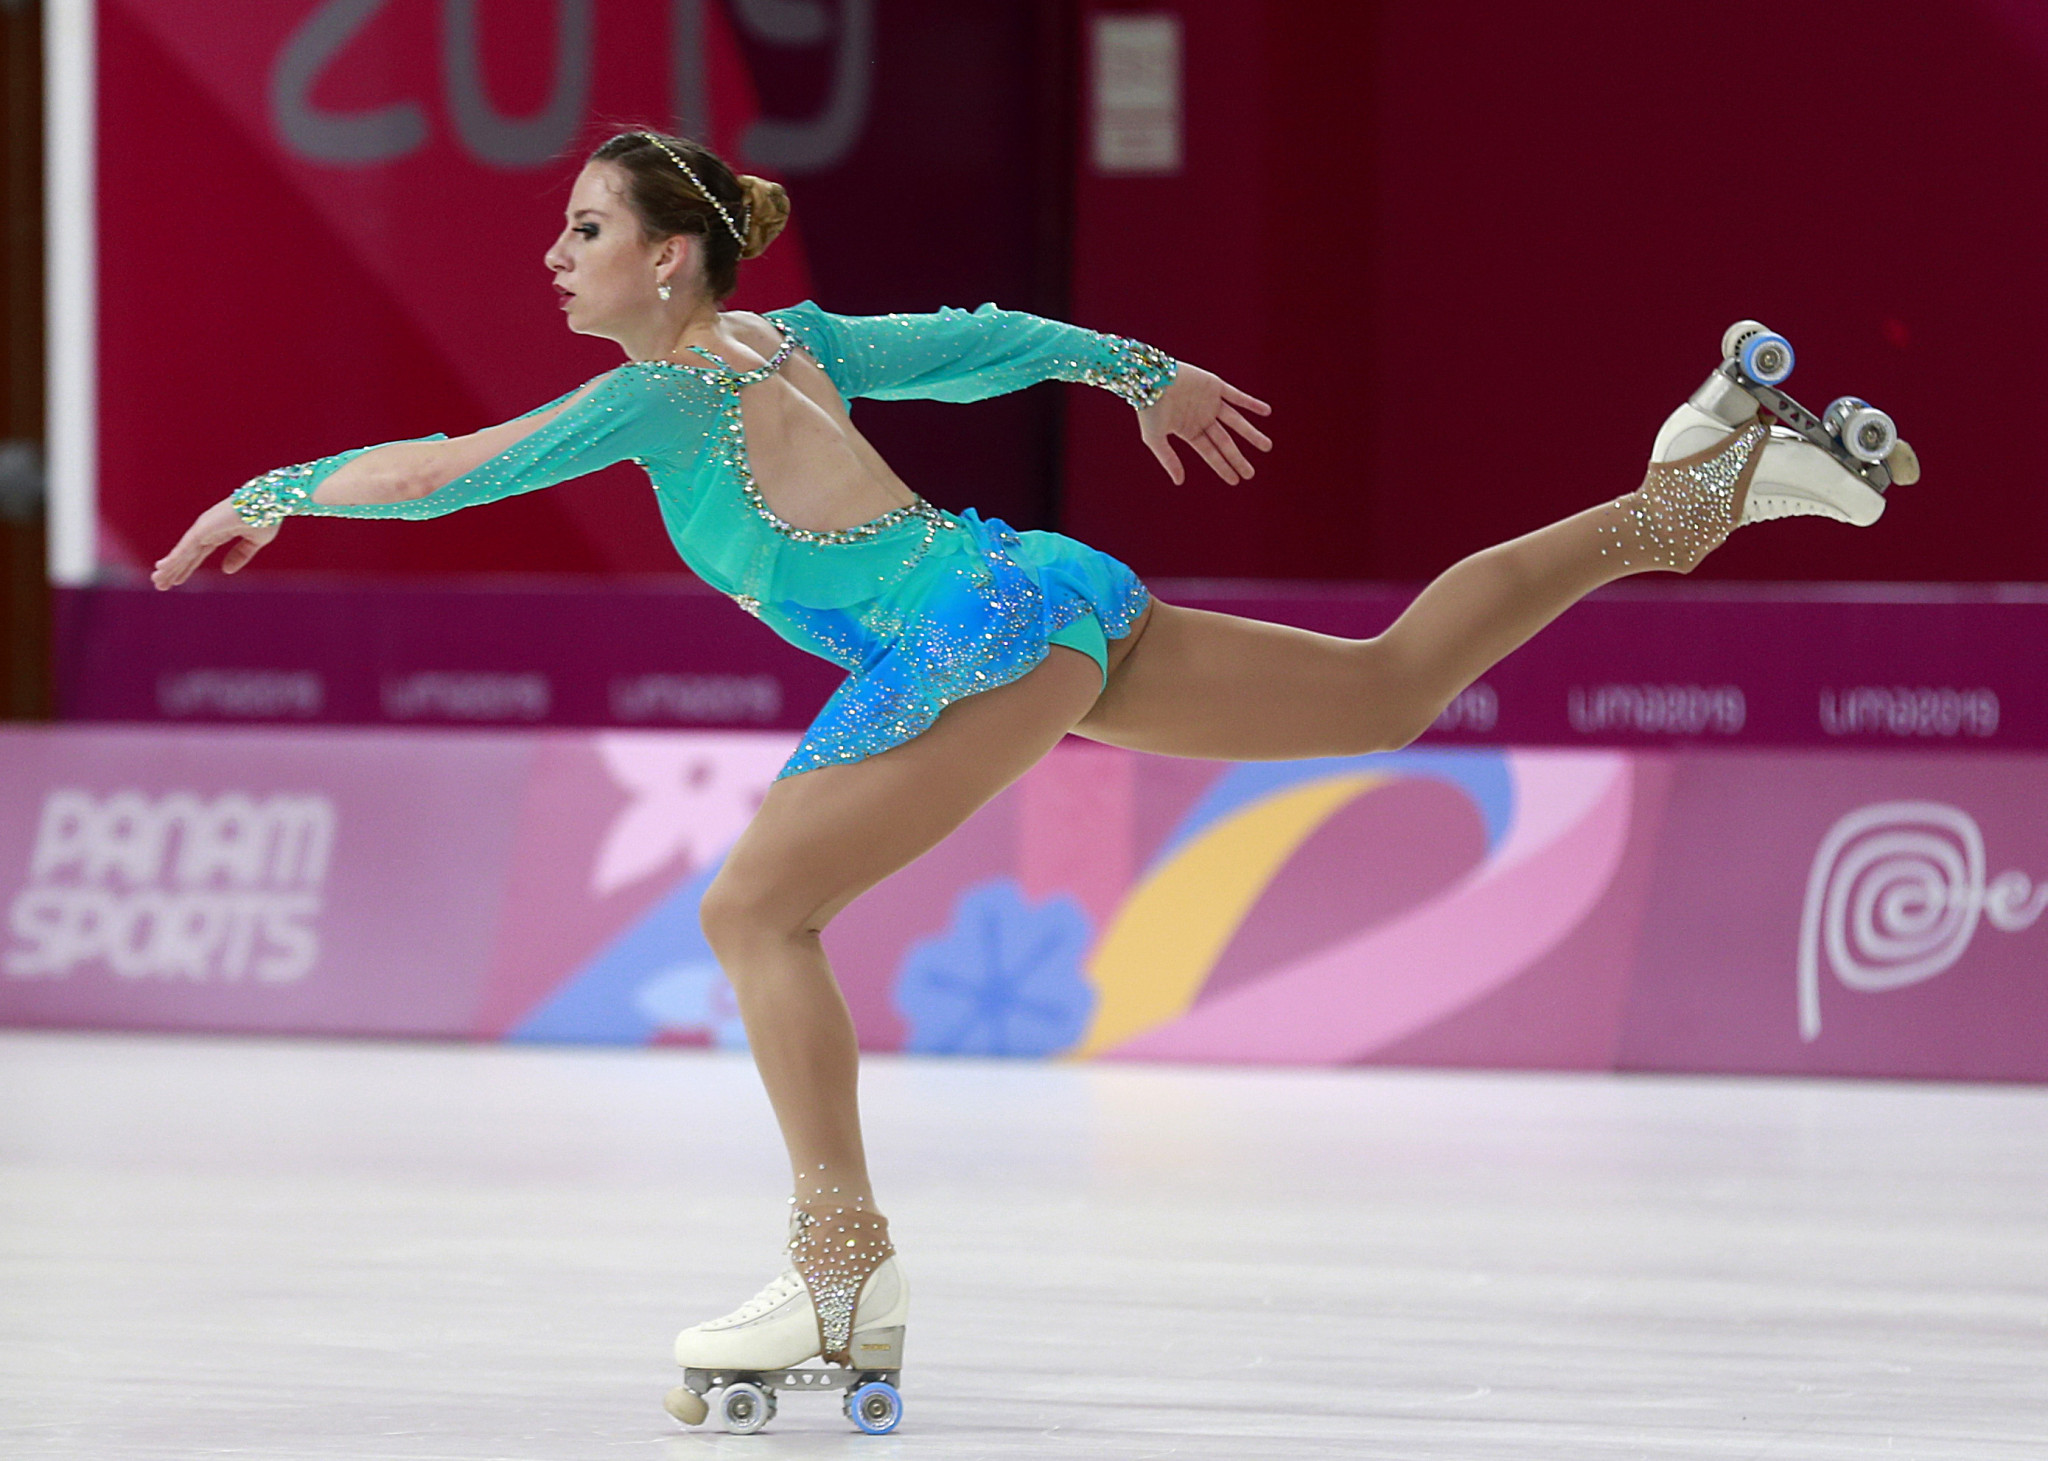 Artistic roller-skating concluded, with Brazil's Bruna Wurts earning gold in the women's competition ©Lima 2019